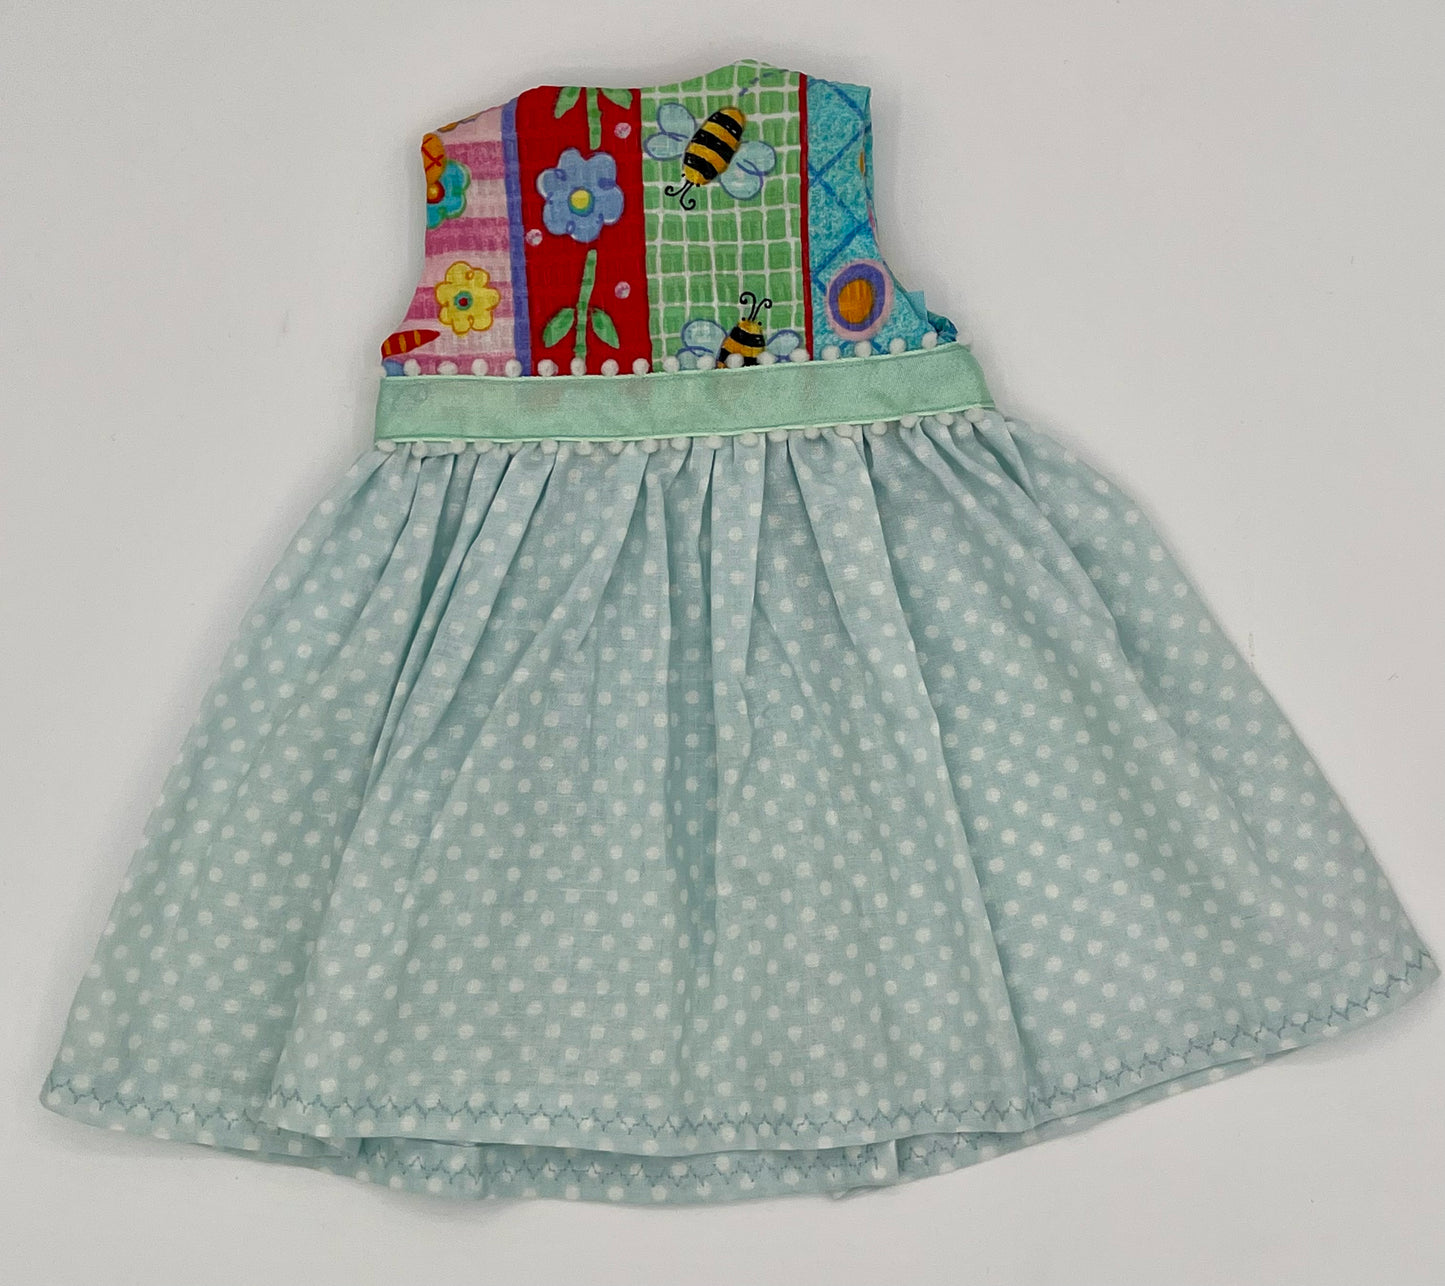 Sleeveless Aqua Dot Dress with Colorful Top for 18" Doll